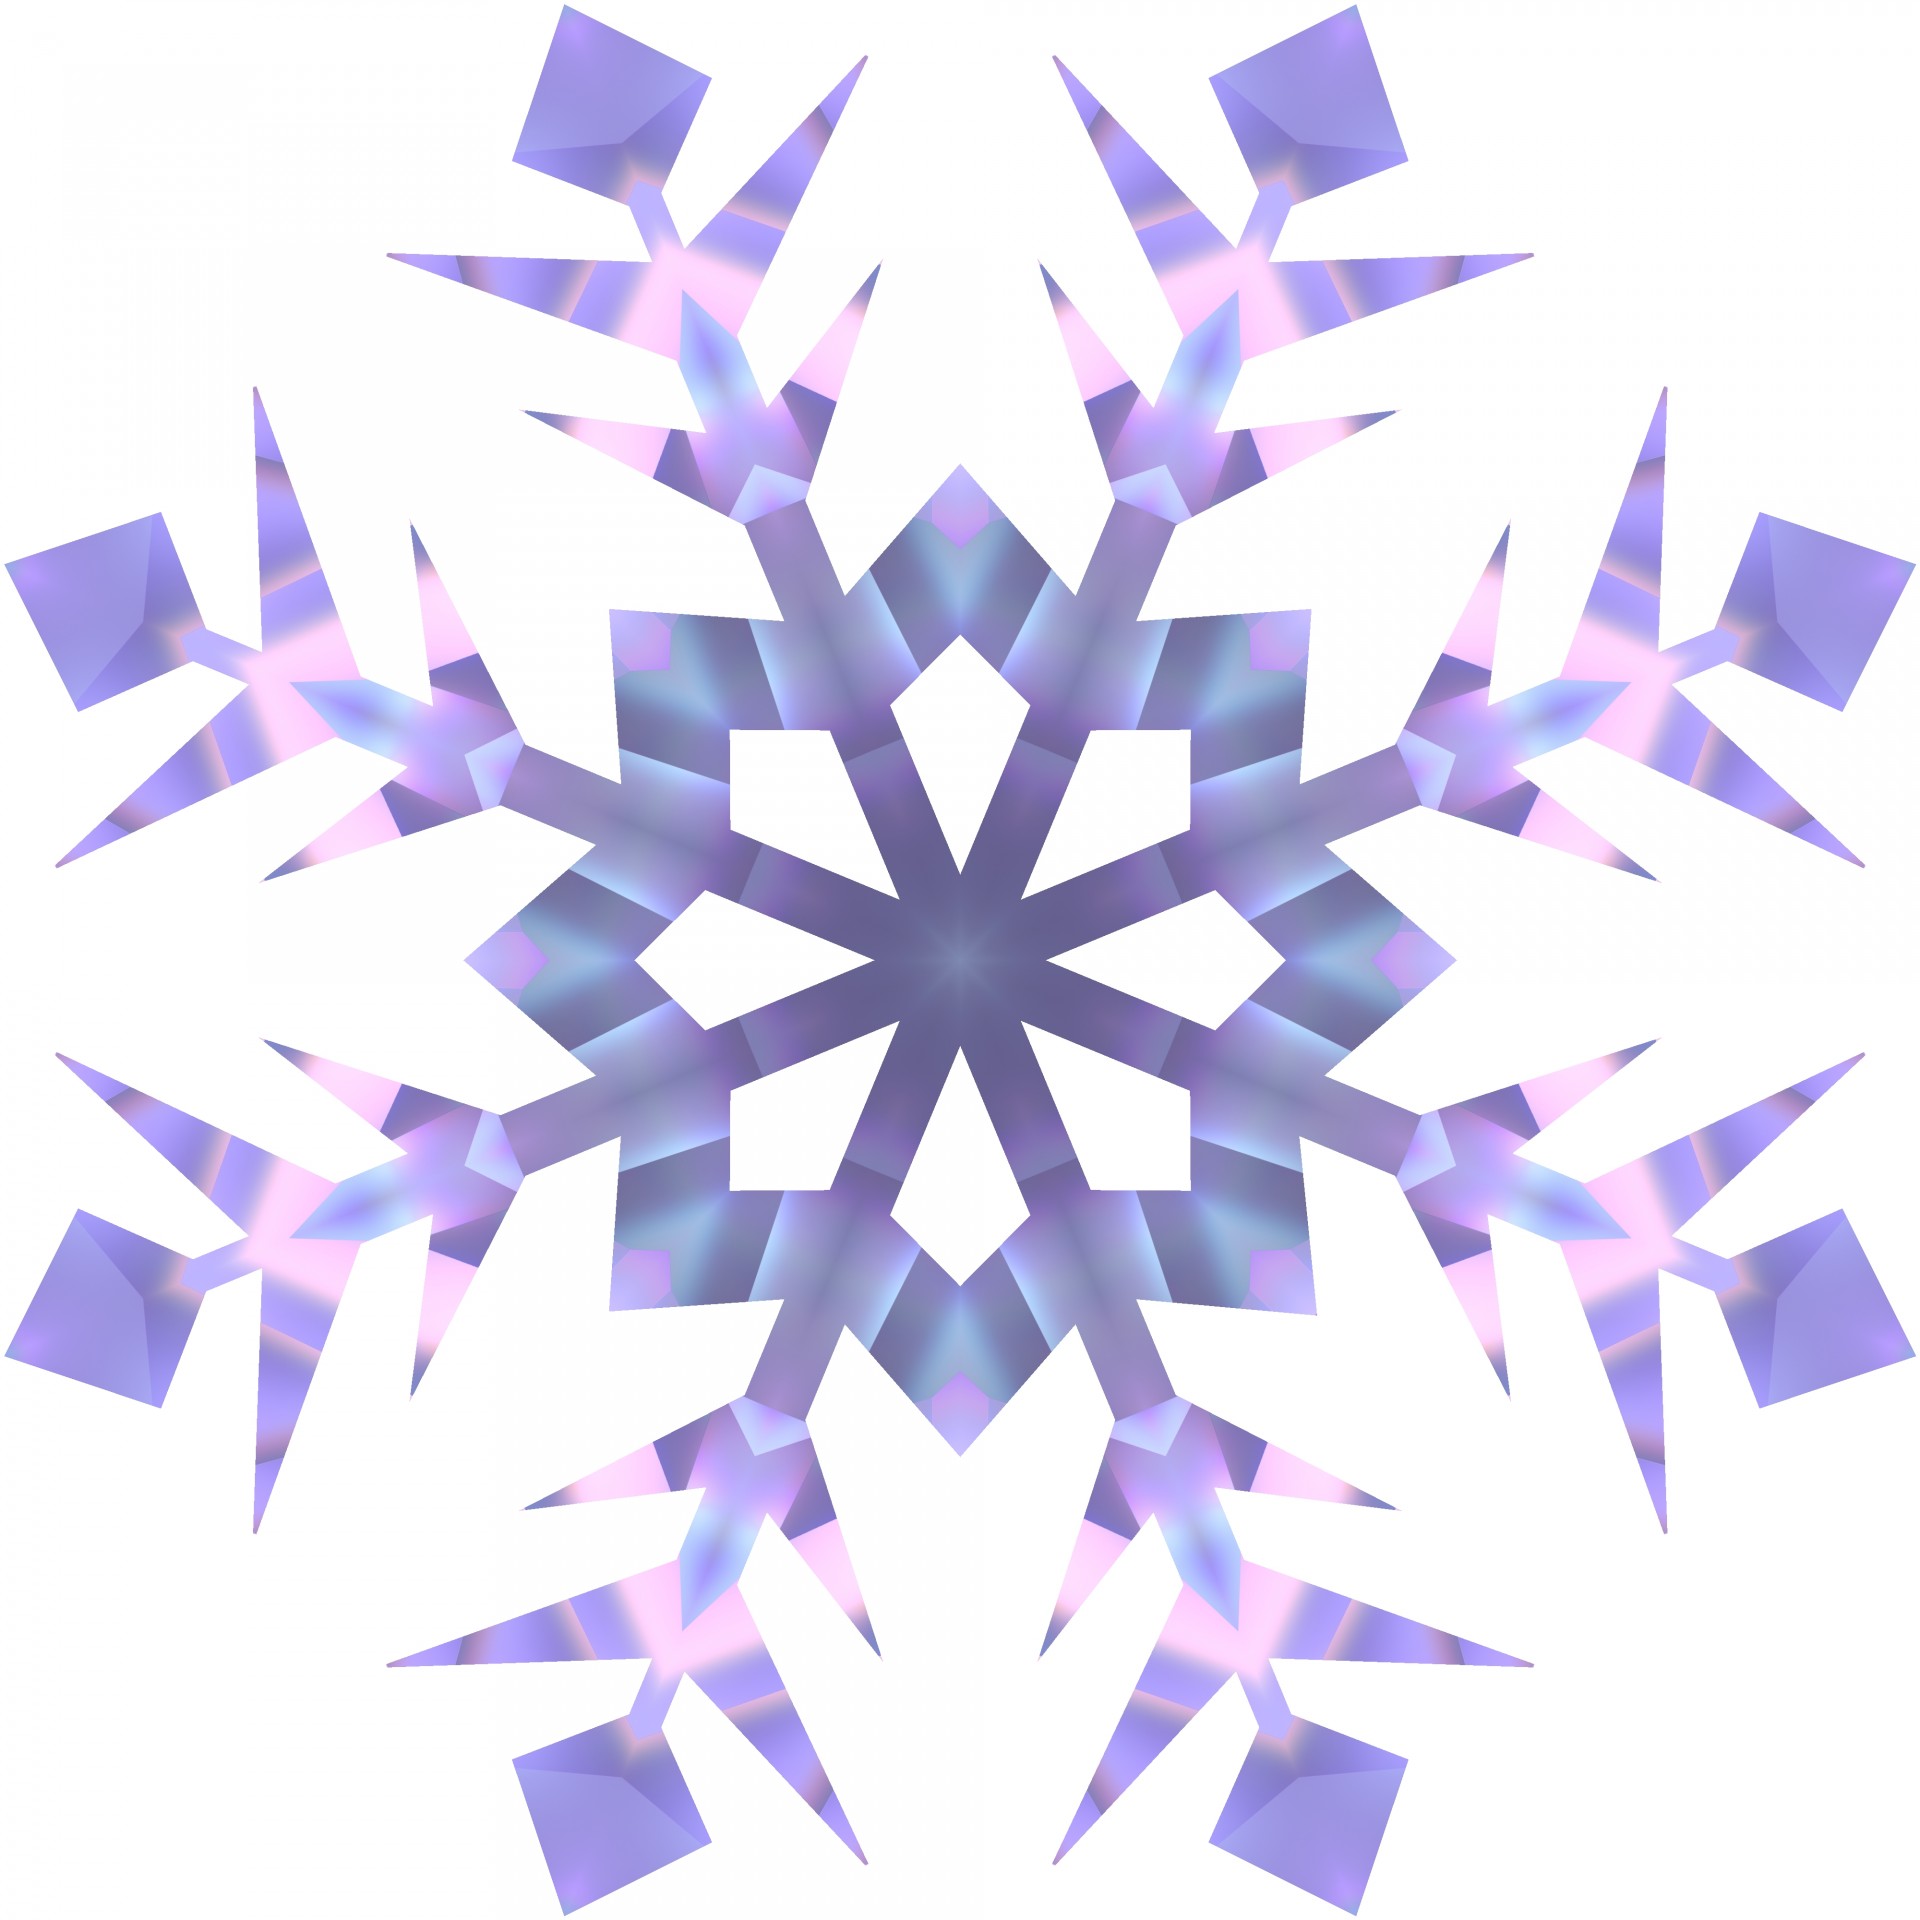 Crystal Snowflake 2 Free Stock Photo - Public Domain Pictures